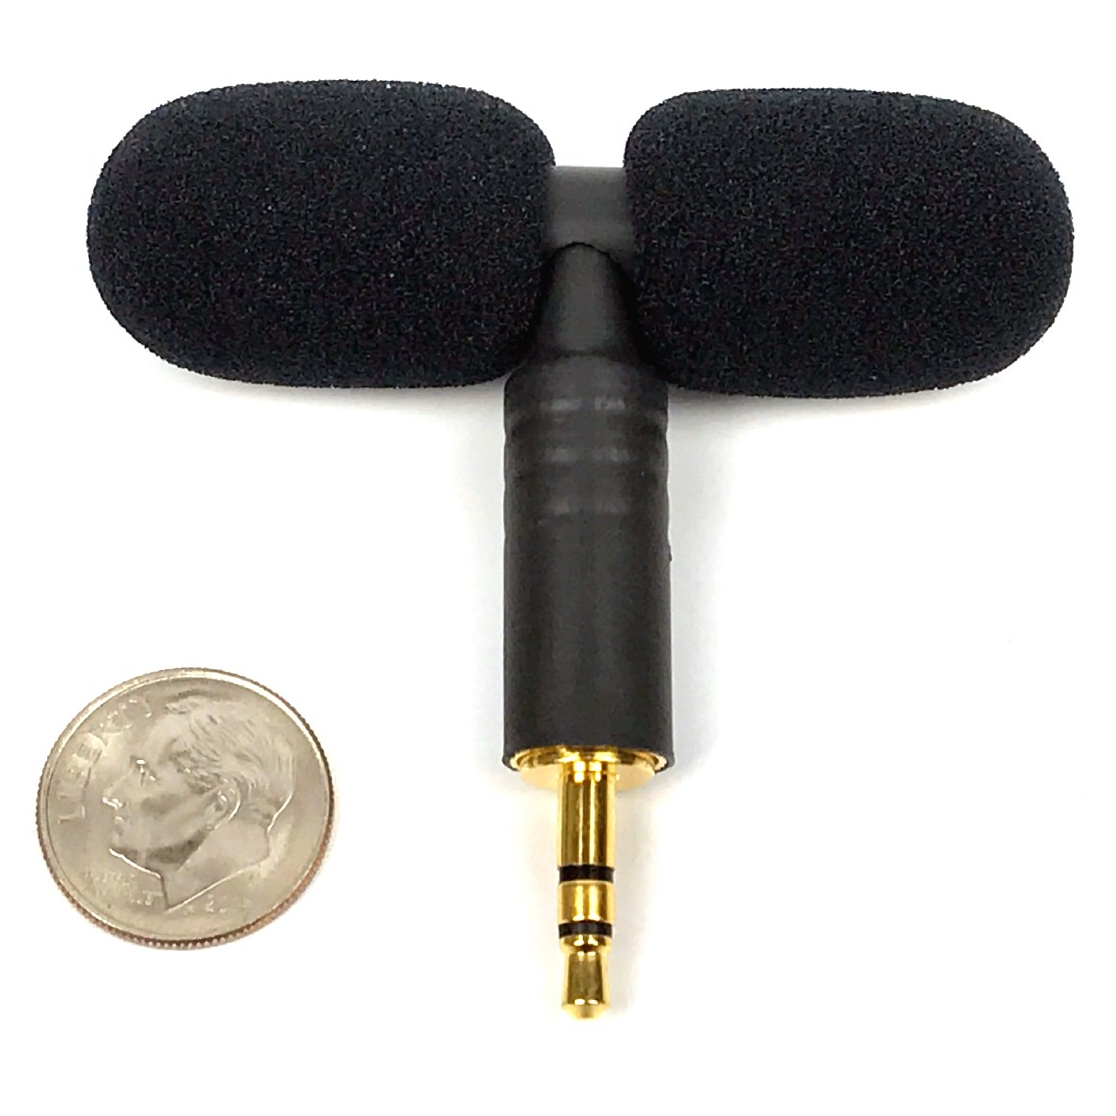 MS-SPSM-1 - Master Series Stereo "T" Microphone Questions & Answers